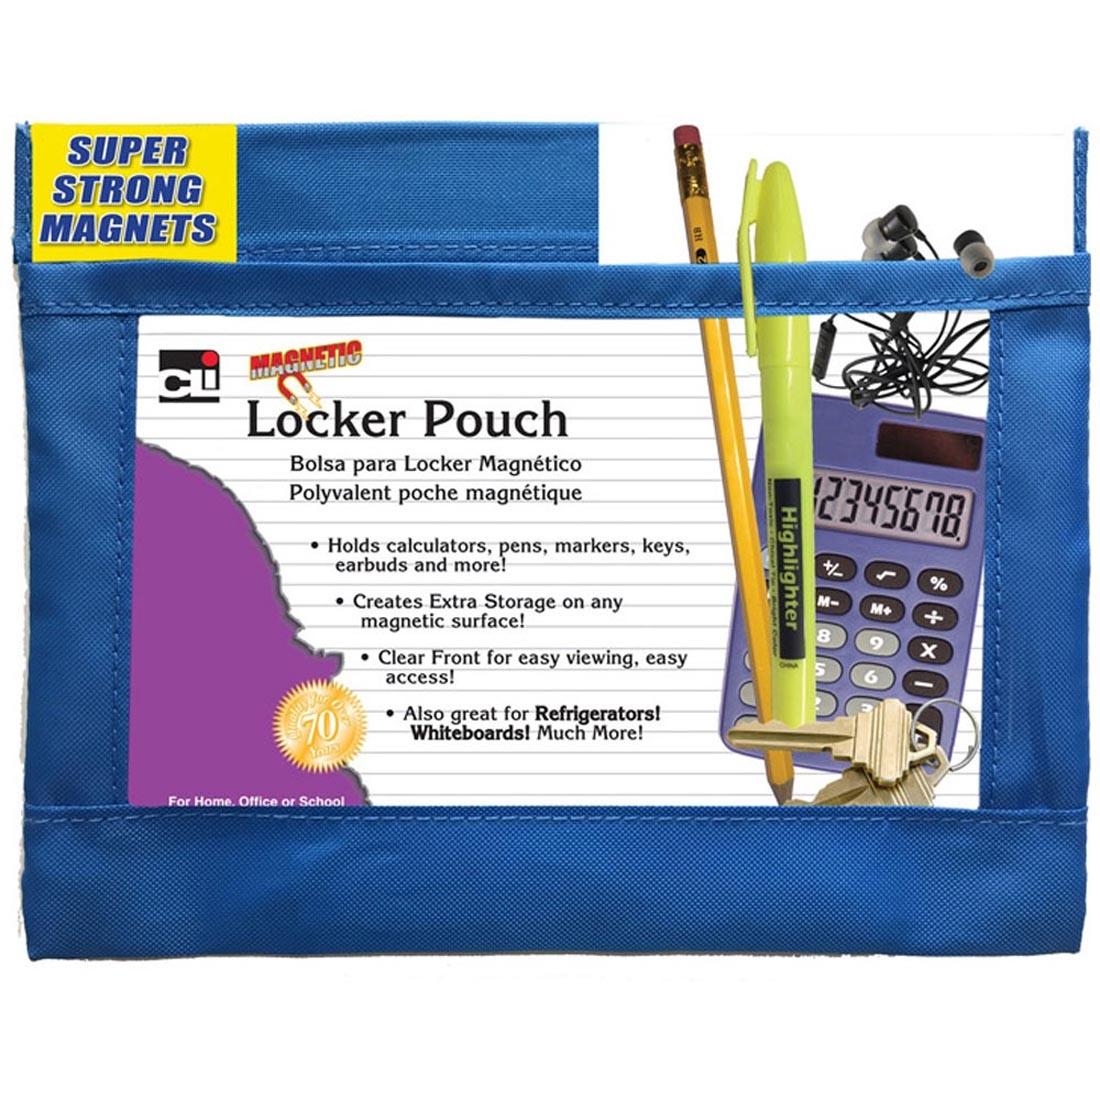 Magnetic Locker Pouch holding calculator, keys and other supplies